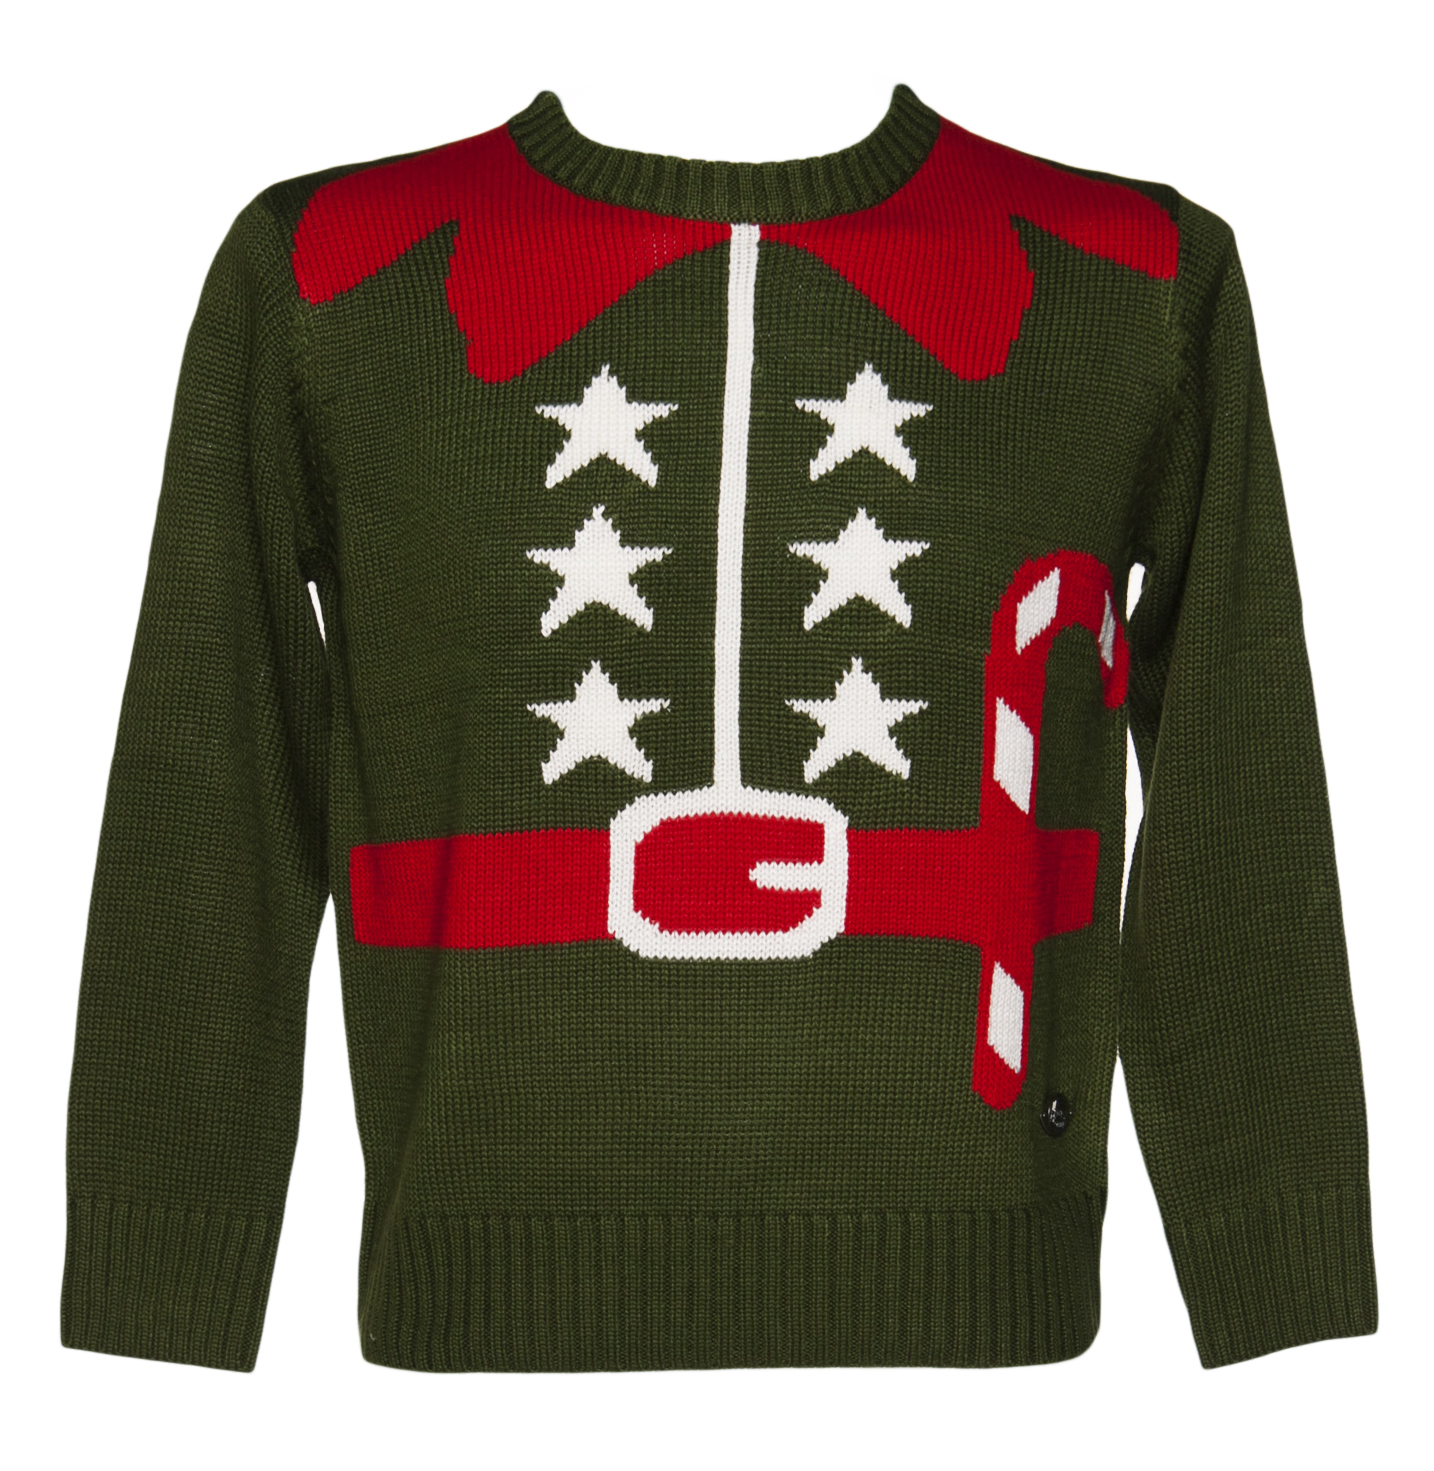 Crazy Granny Clothing Unisex Elf Costume Christmas Jumper from Crazy